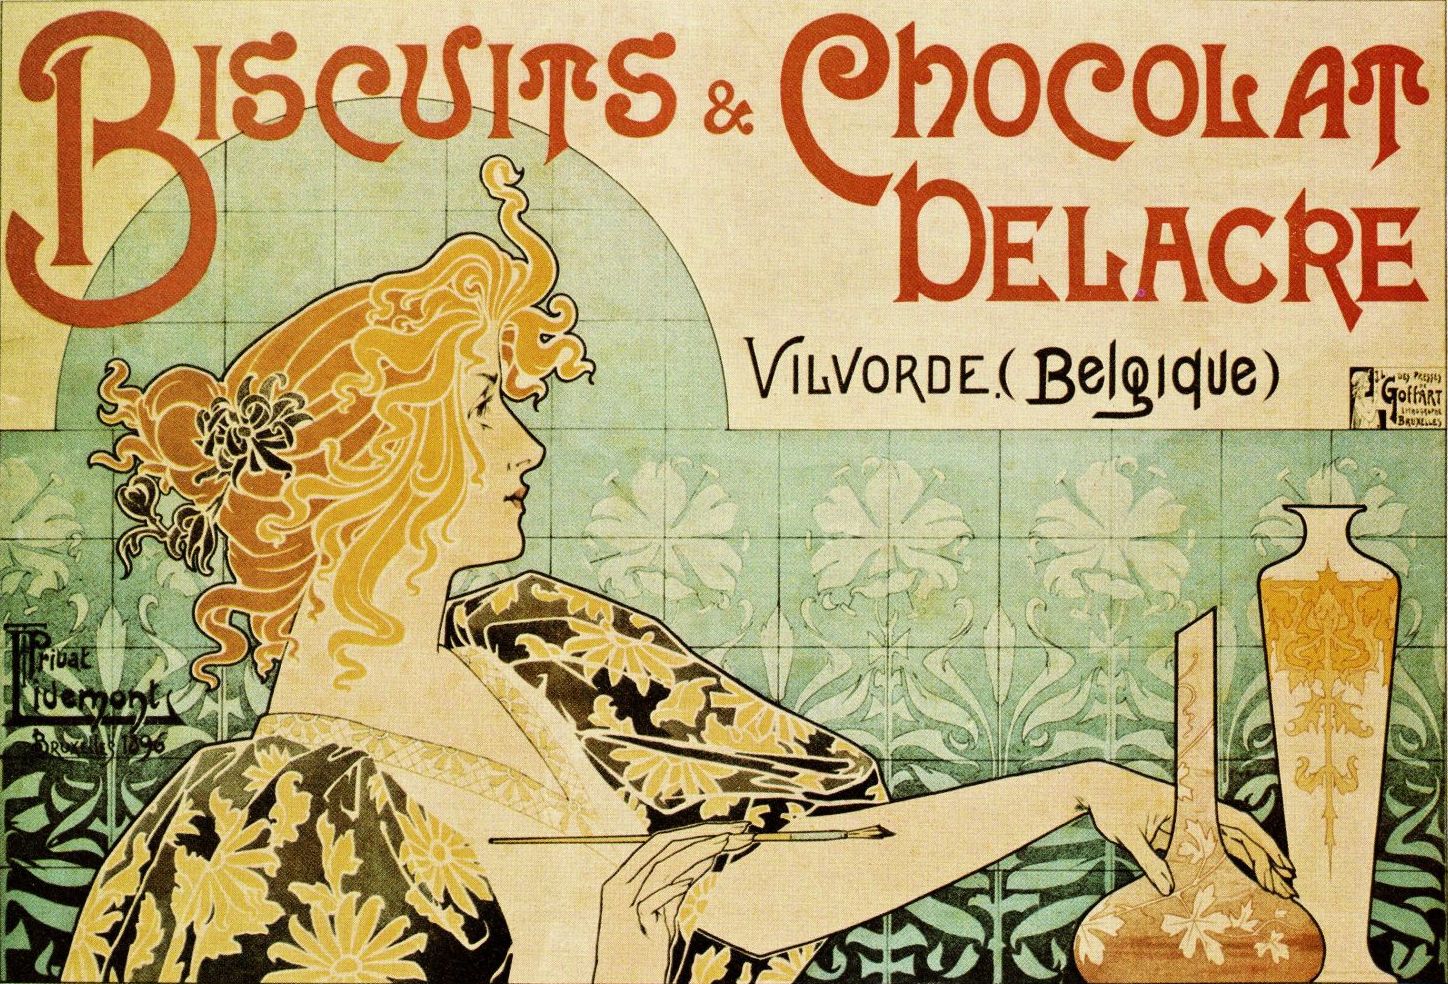 Biscuits_and_Chocolat_Delacre.jpg